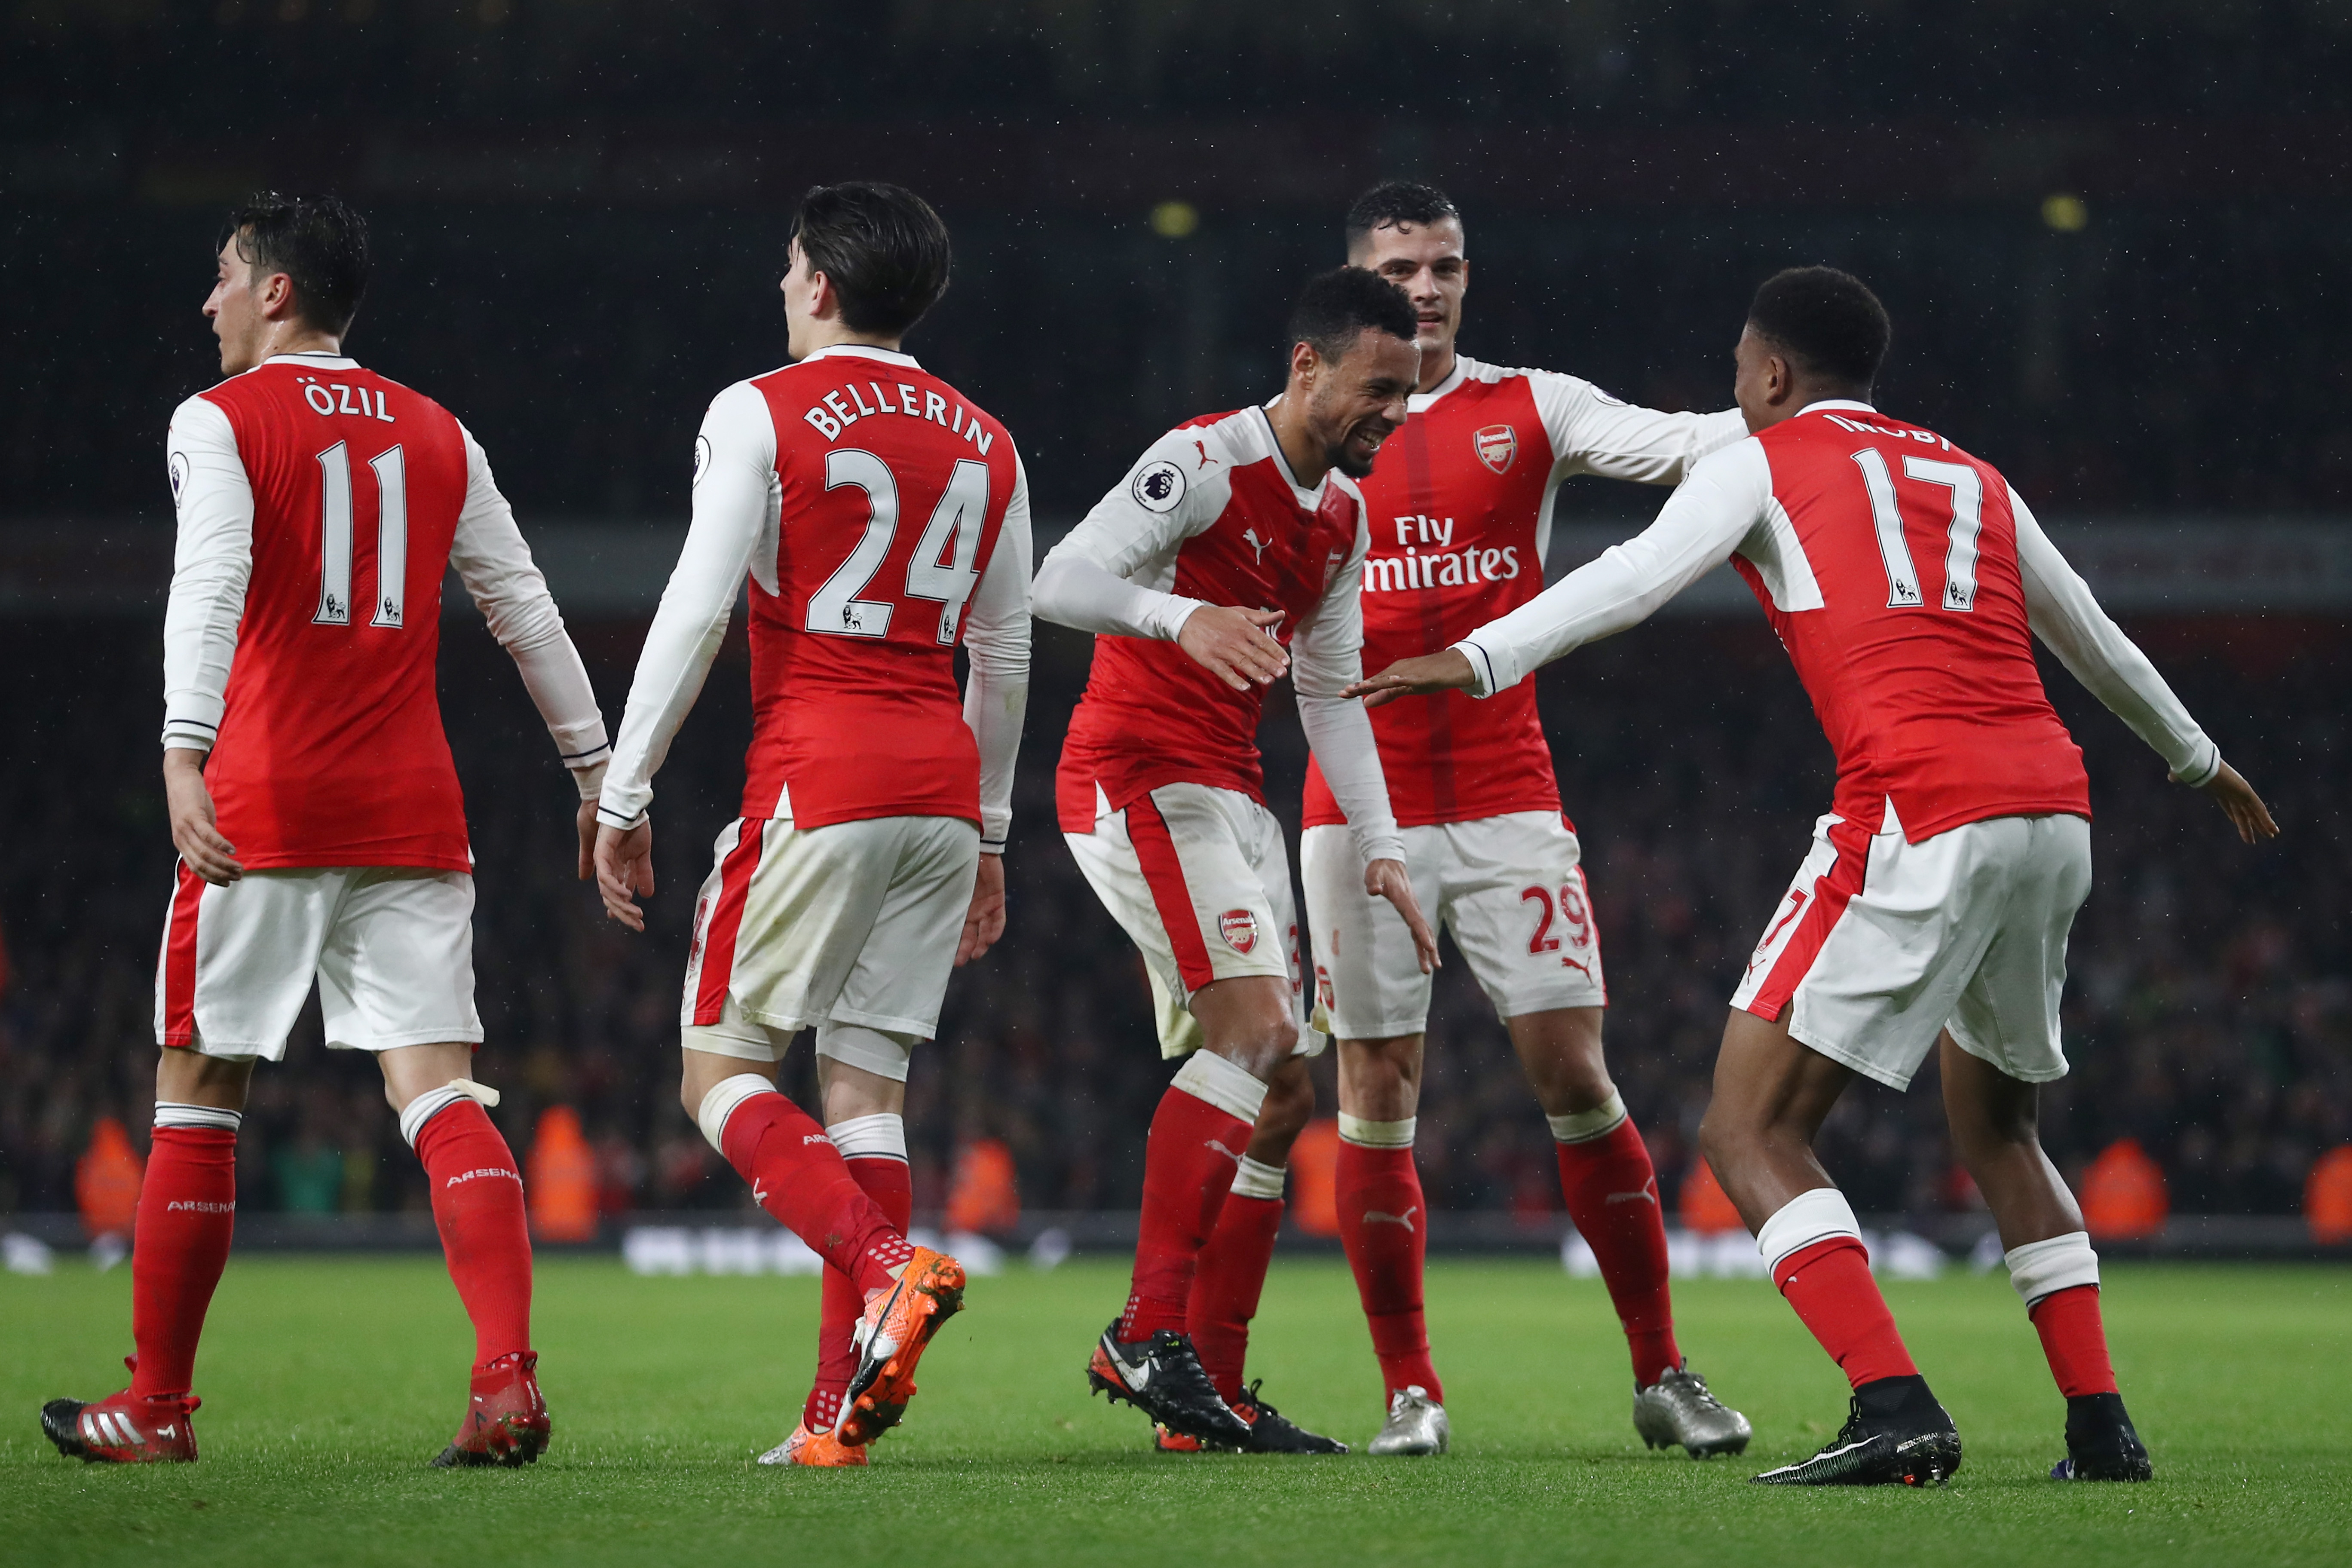 LONDON, ENGLAND - DECEMBER 10:  Alex Iwobi of Arsenal (R) celebrates scoring his sides third goal with his Arsenal team mates during the Premier League match between Arsenal and Stoke City at the Emirates Stadium on December 10, 2016 in London, England.  (Photo by Julian Finney/Getty Images)